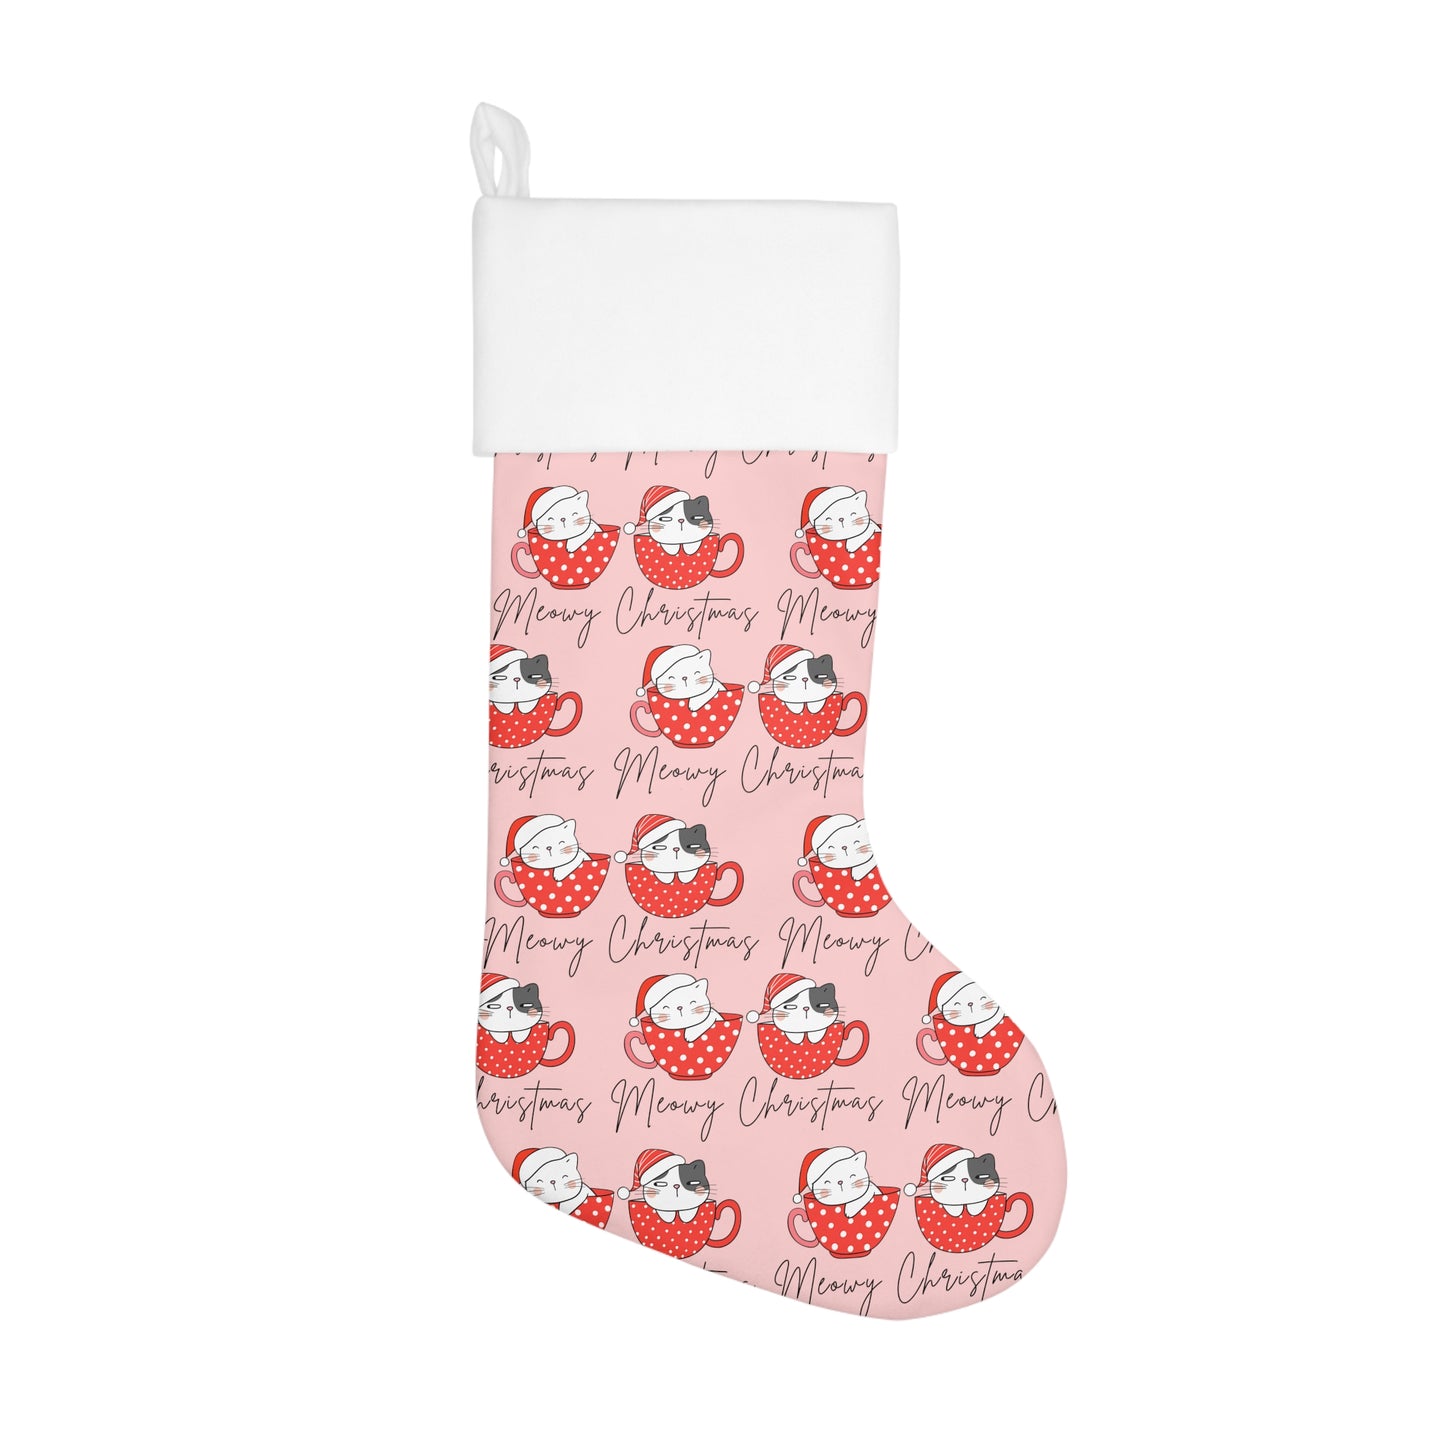 Cute Cats Merry Xmas pattern Stocking, Kawaii cats with red Santa's hat Christmas Holiday Stocking, Funny Cats Merry Christmas decoration